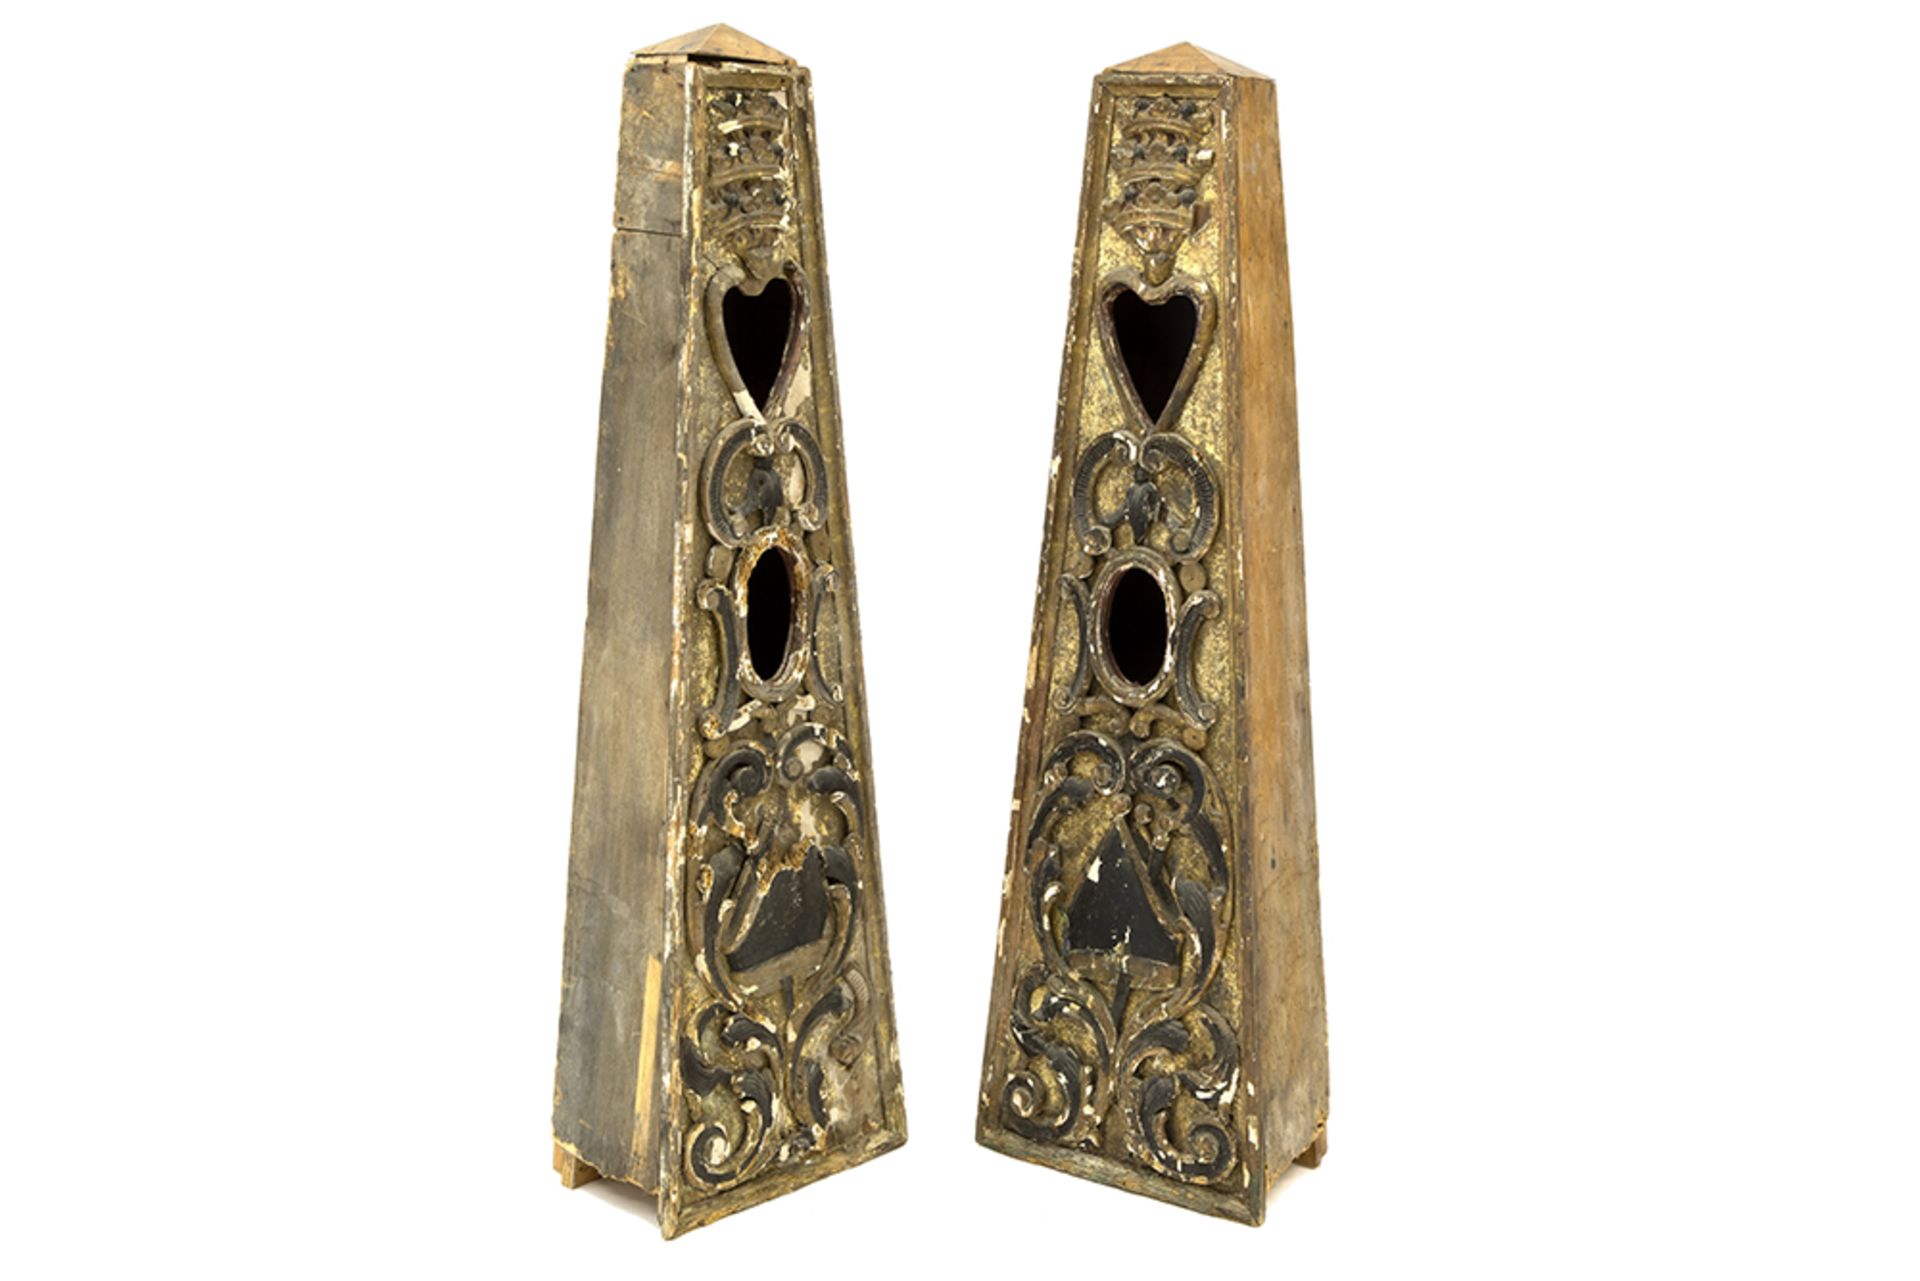 pair of 18th Cent. South European decorative obelisk shaped sculptures in polychromed wood with a